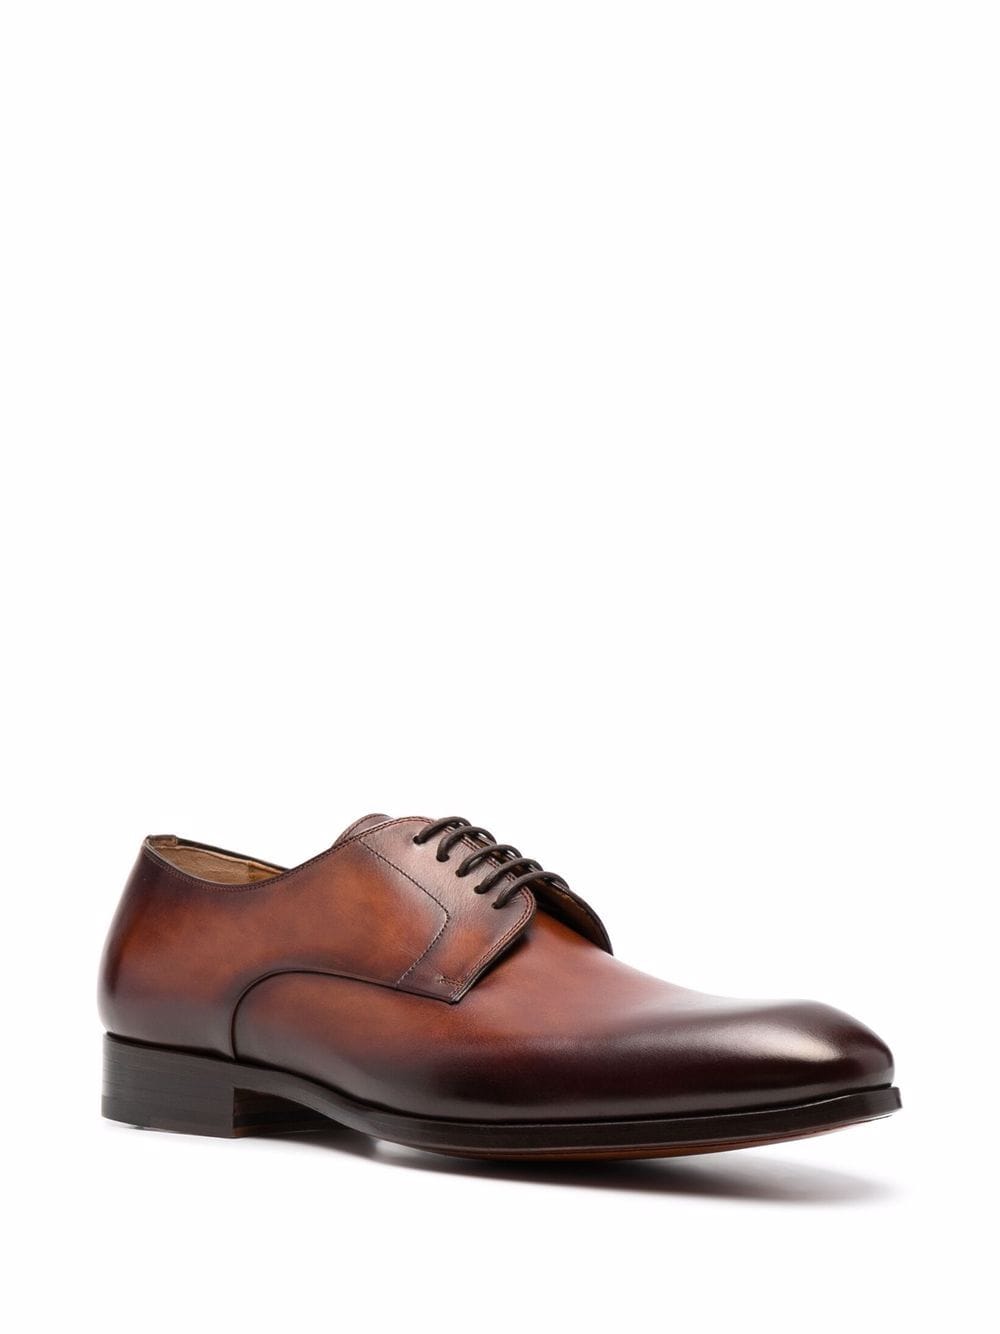 Image 2 of Magnanni leather derby shoes